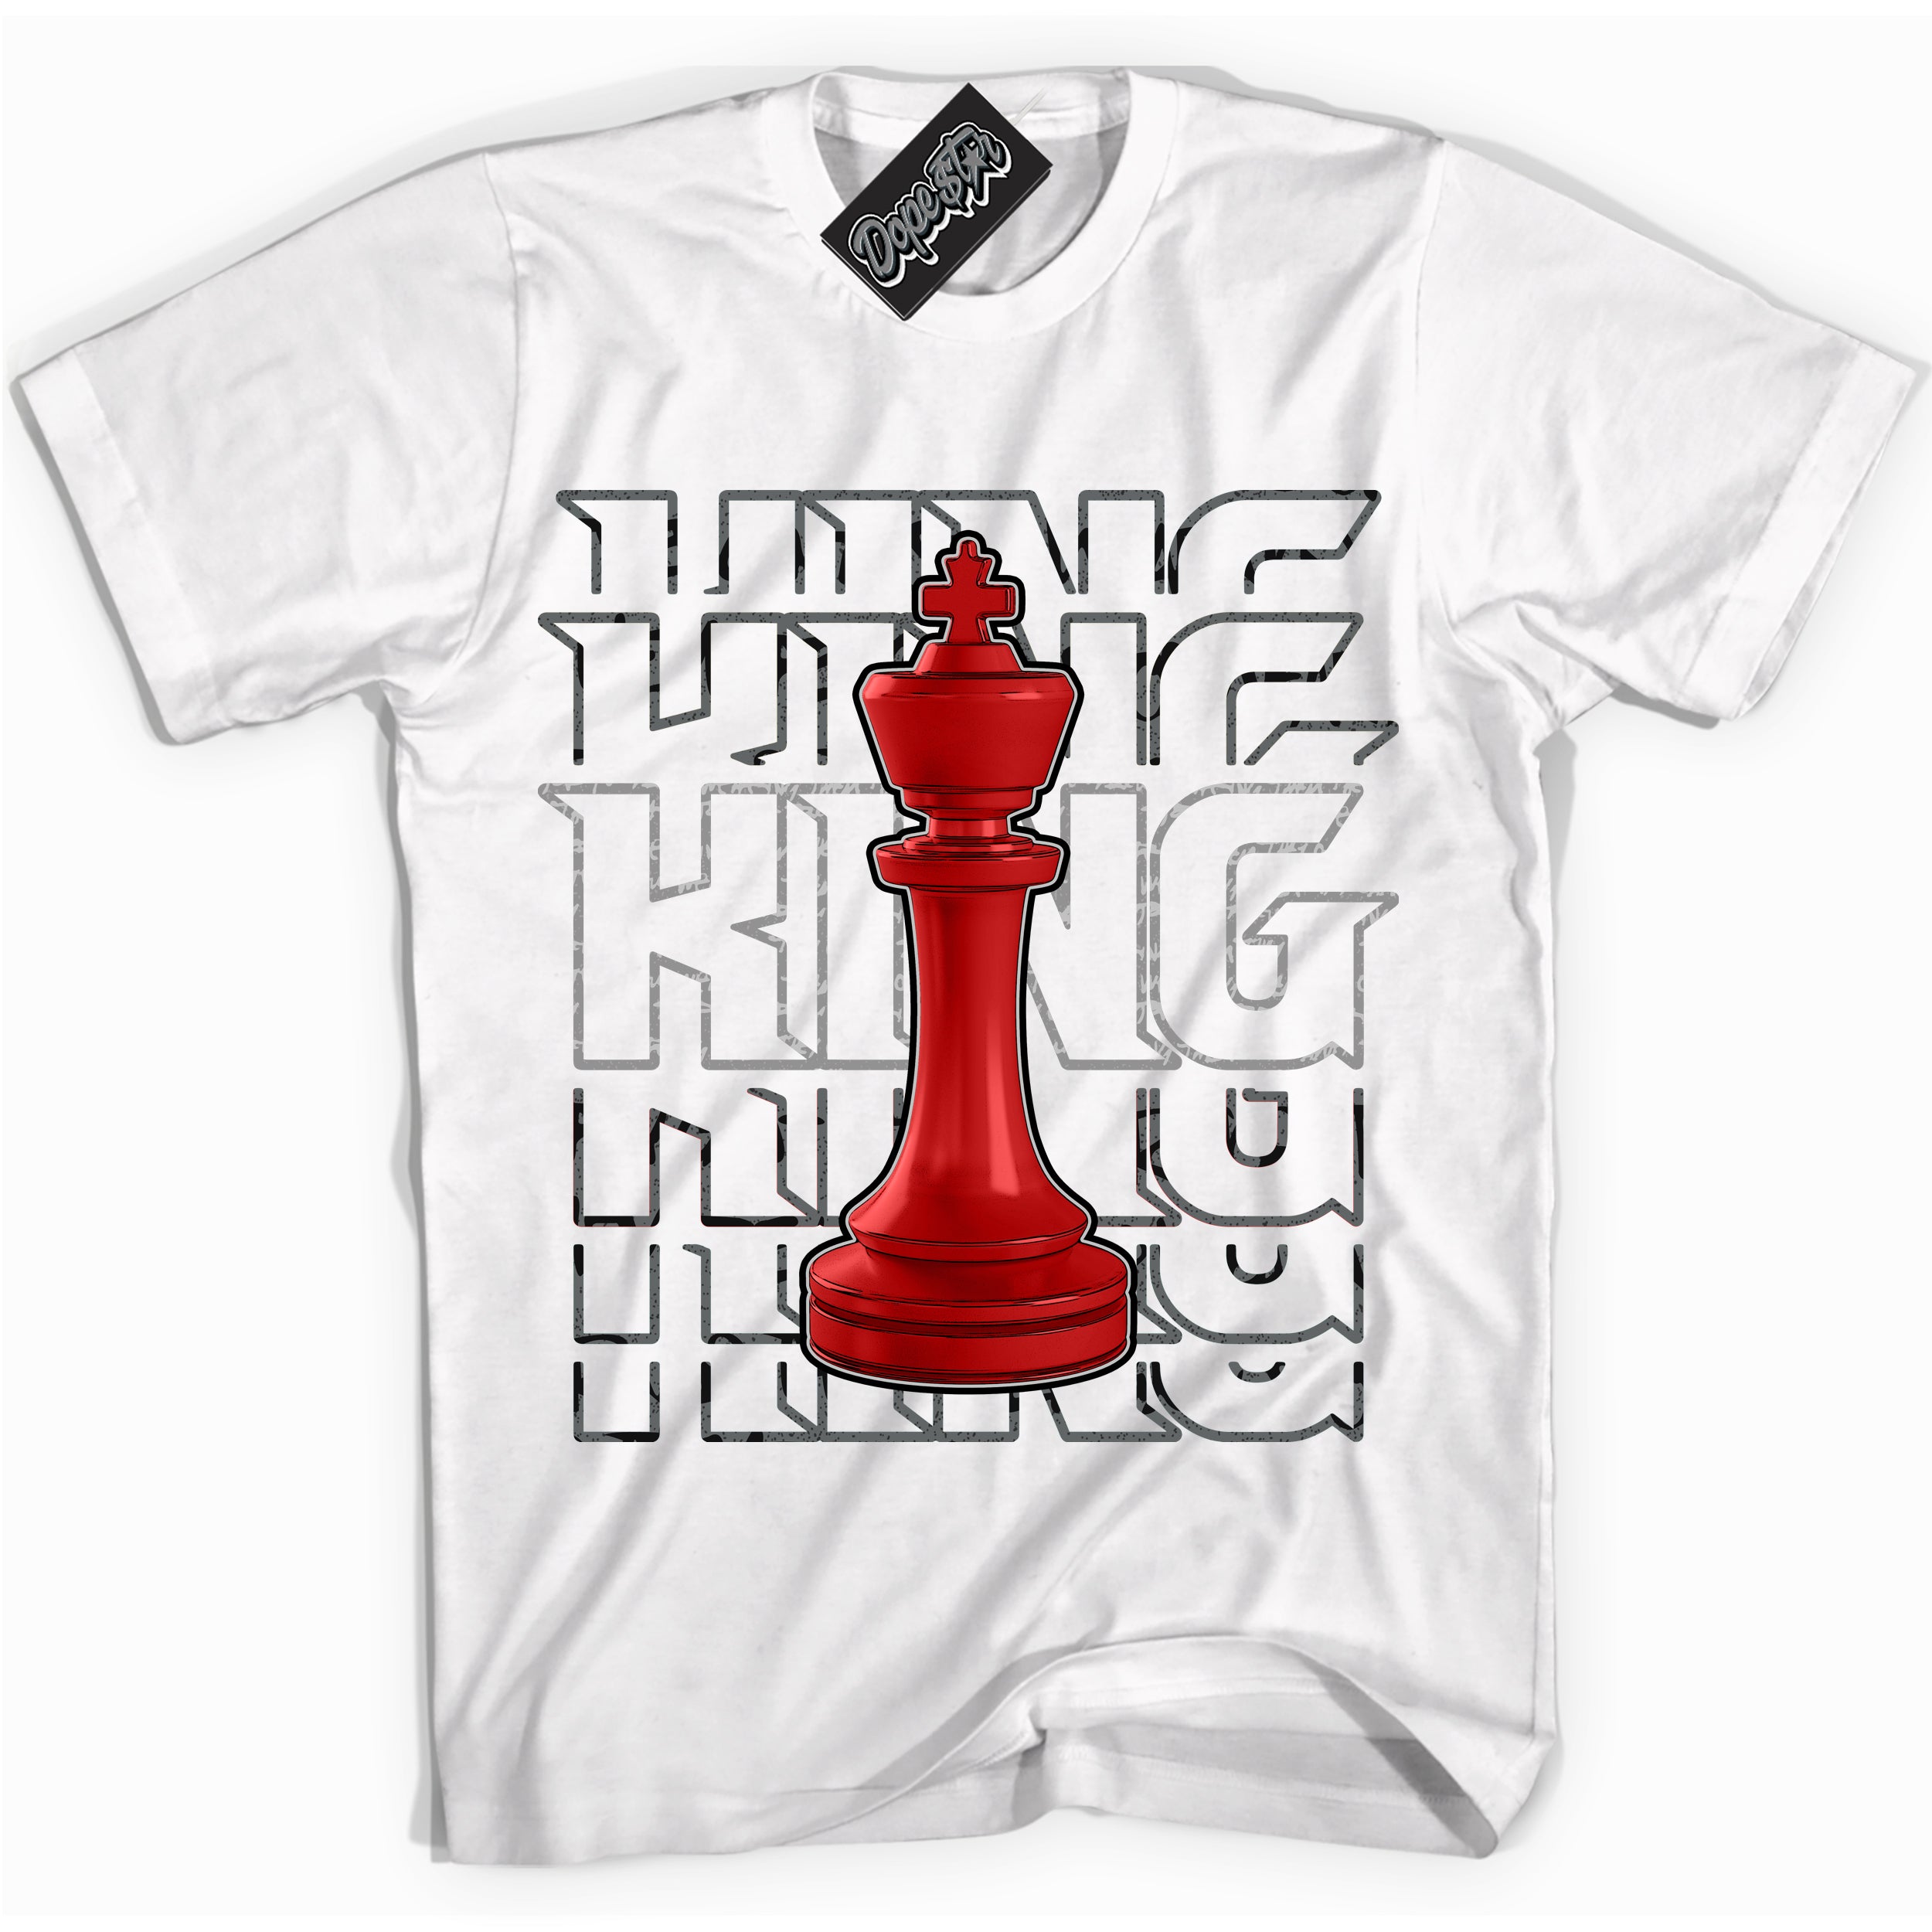 Cool White Shirt with “ King Chess ” design that perfectly matches Rebellionaire 1s Sneakers.